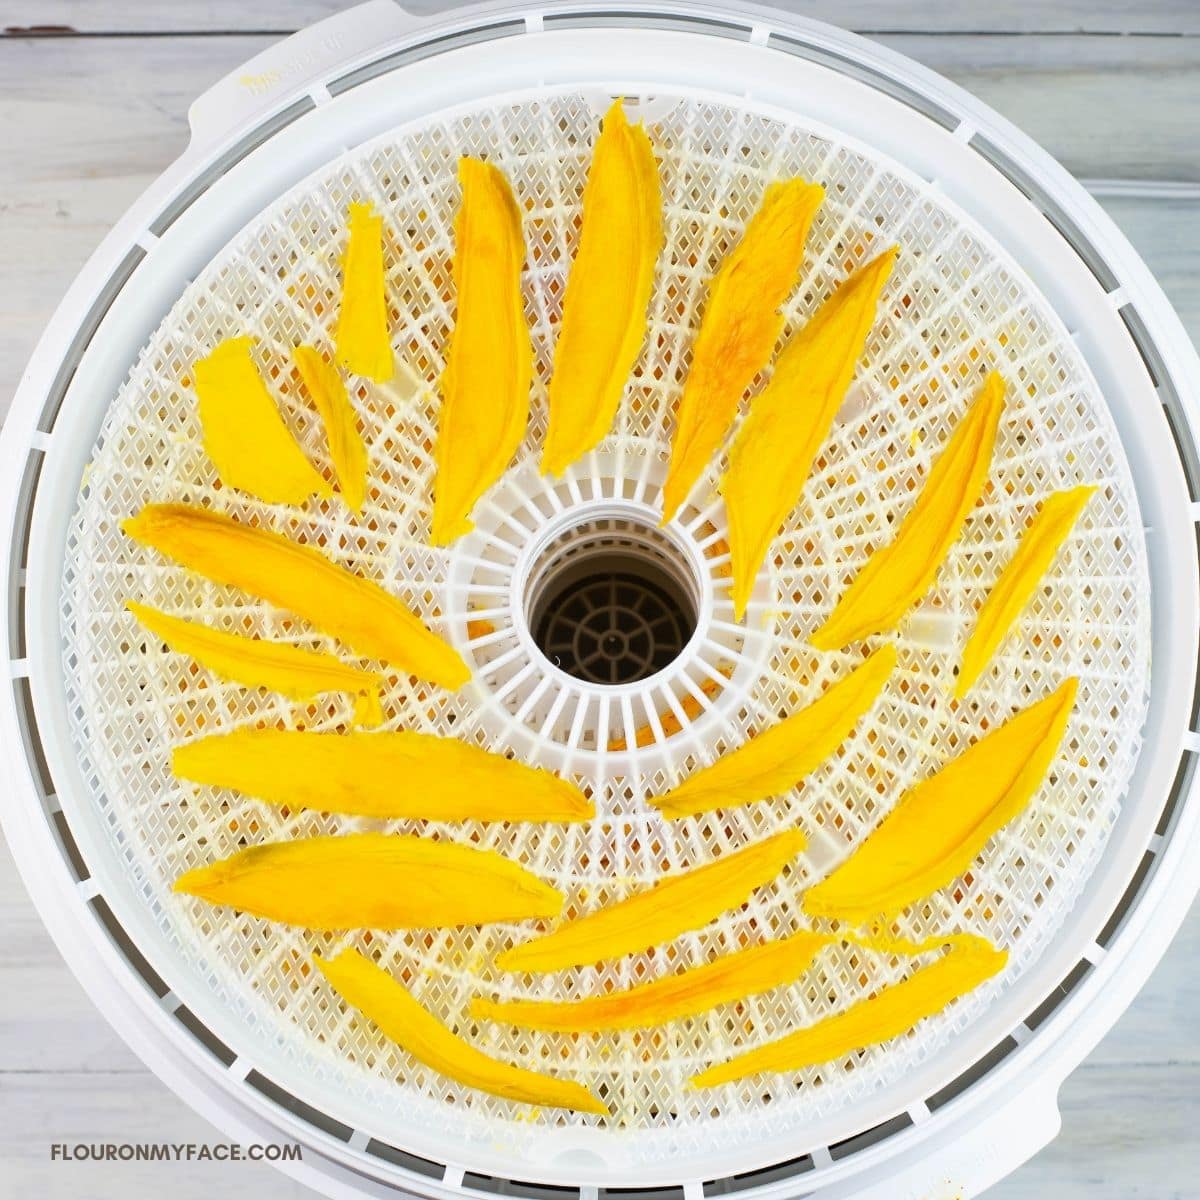 Overhead image of dried mango slices on a round dehydrator tray.